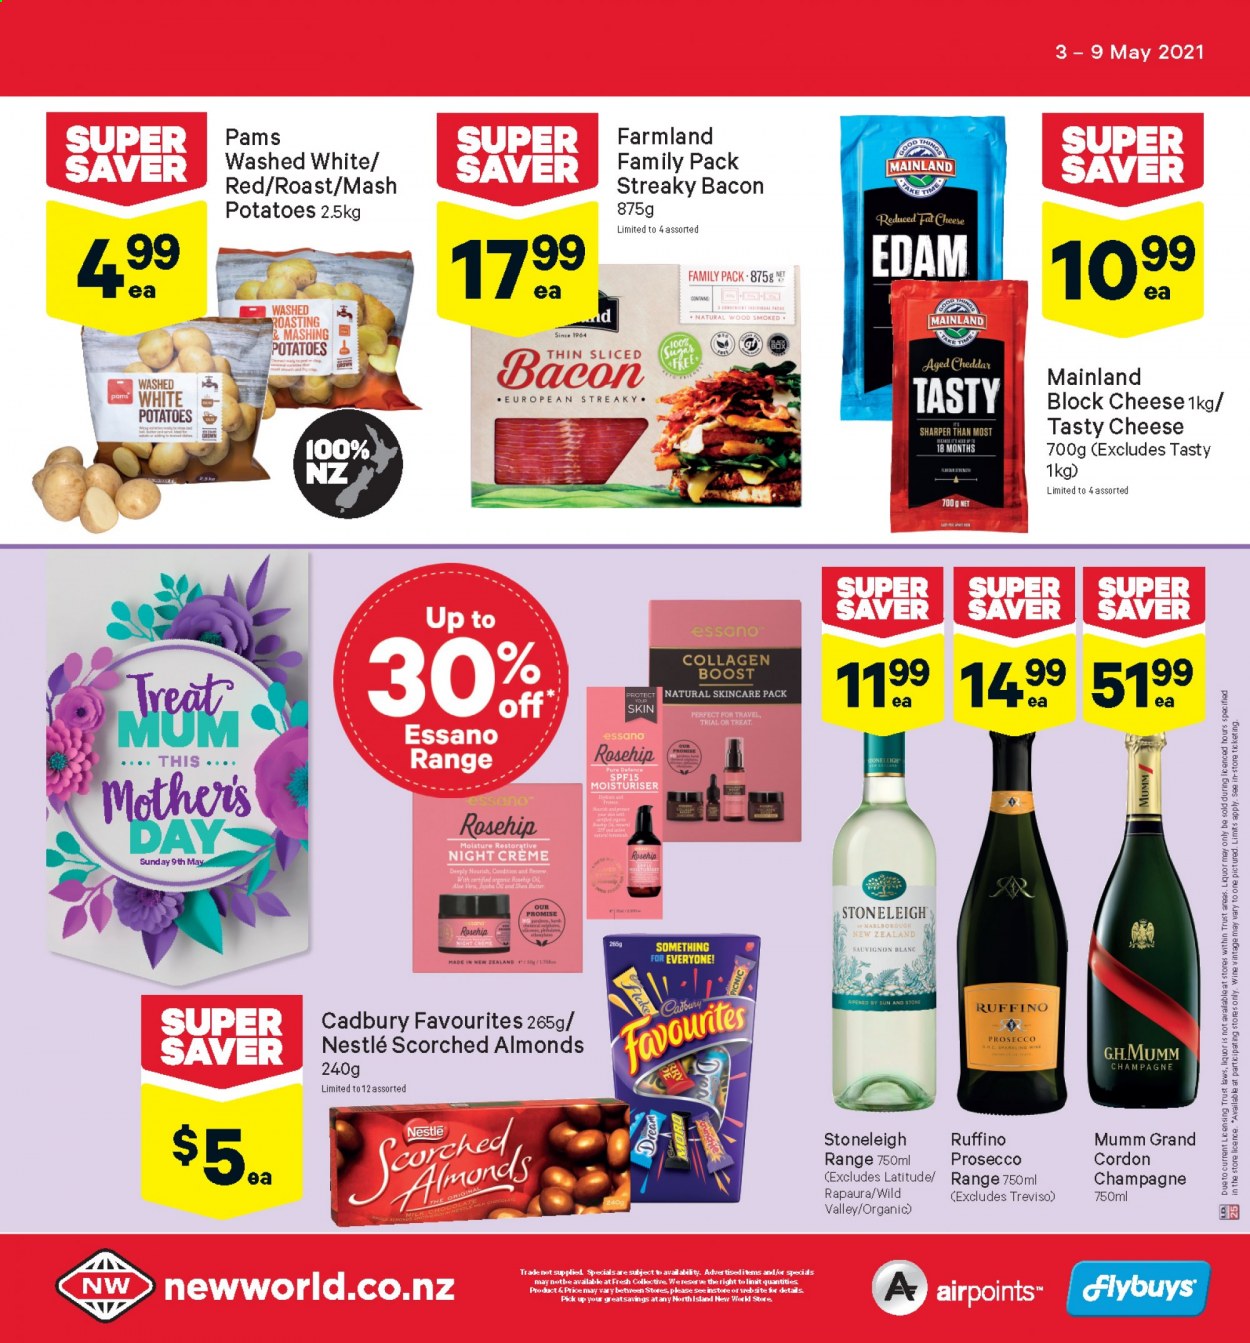 thumbnail - New World mailer - 03.05.2021 - 09.05.2021 - Sales products - bacon, streaky bacon, edam cheese, cheddar, cheese, milk, Nestlé, Cadbury, Scorched Almonds, Boost, sparkling wine, white wine, champagne, prosecco, wine, Sauvignon Blanc, Essano, Mum. Page 40.